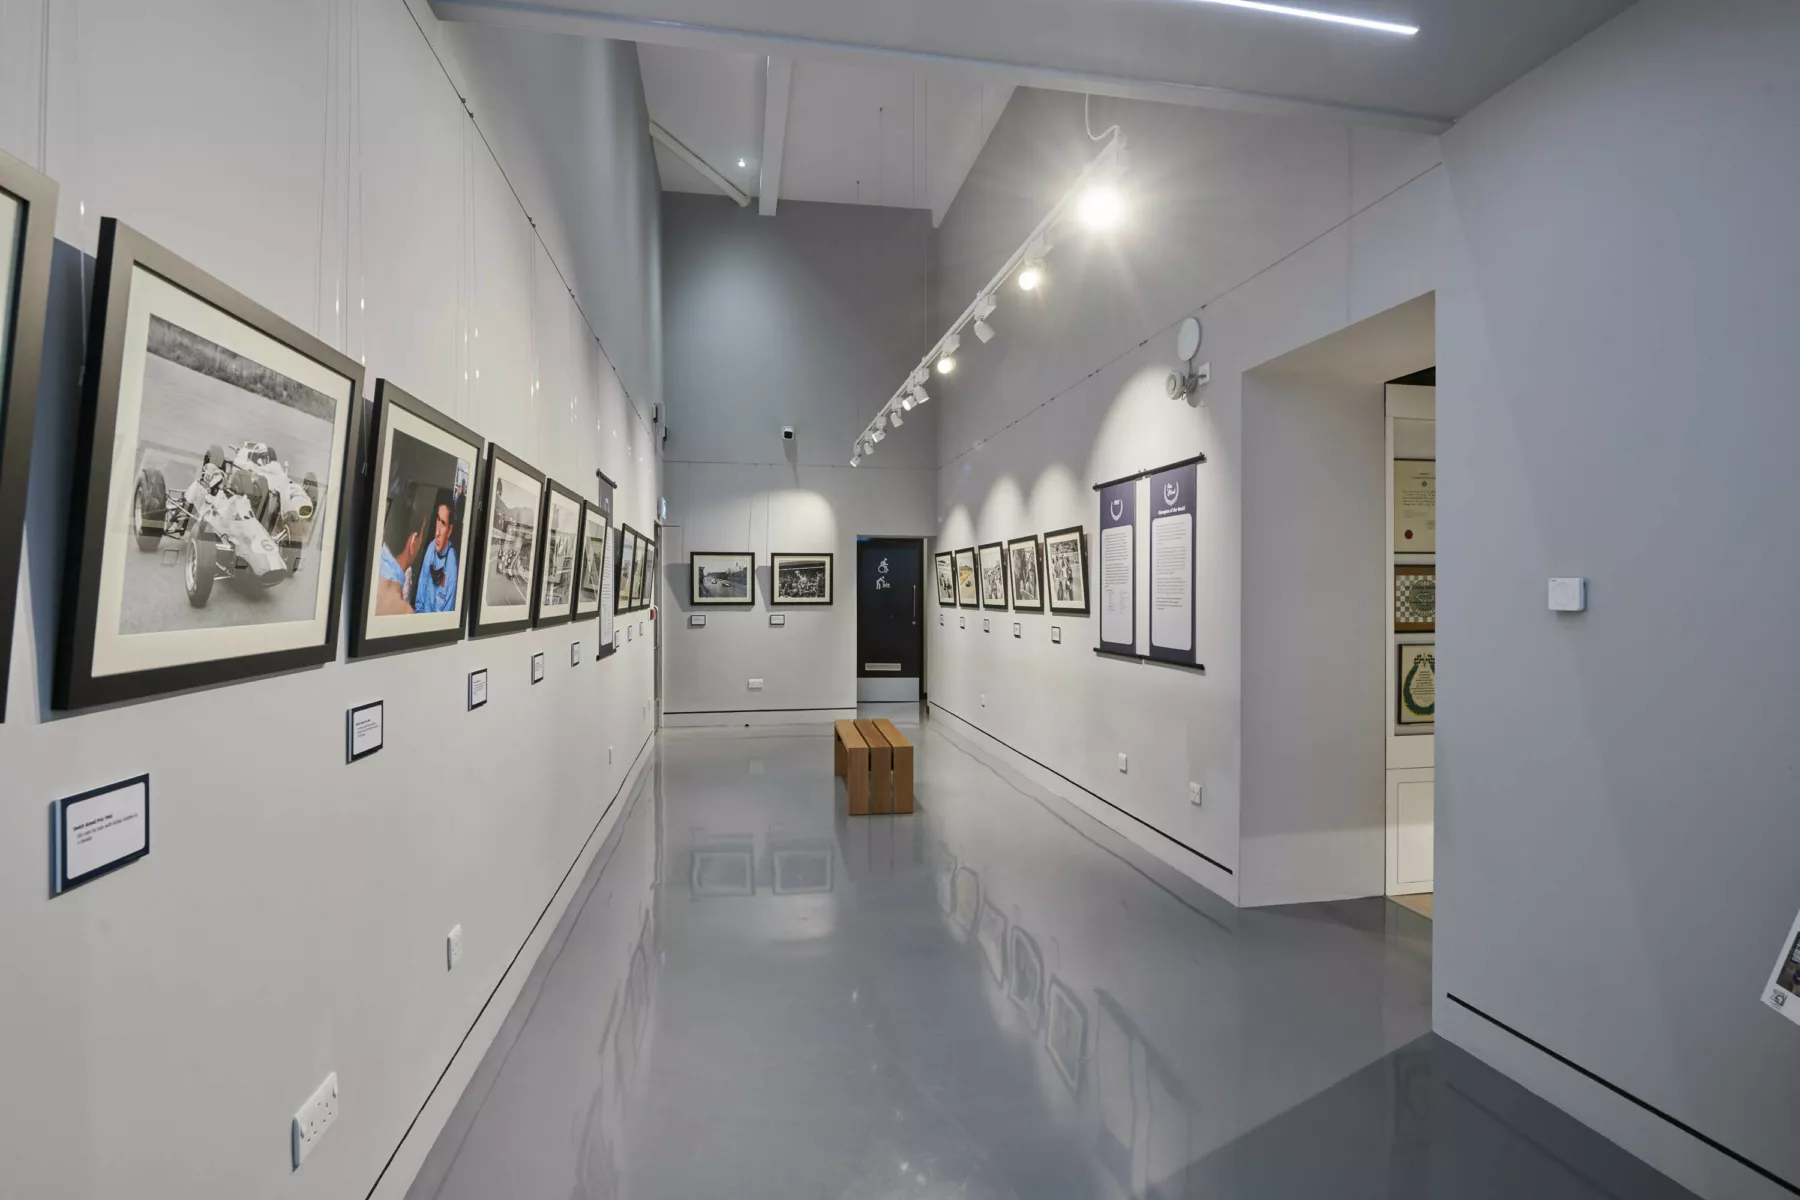 Inside a gallery area at the Jim Clark Motorsport Museum, Scottish Borders. A display of photography is arrange in the tall space.